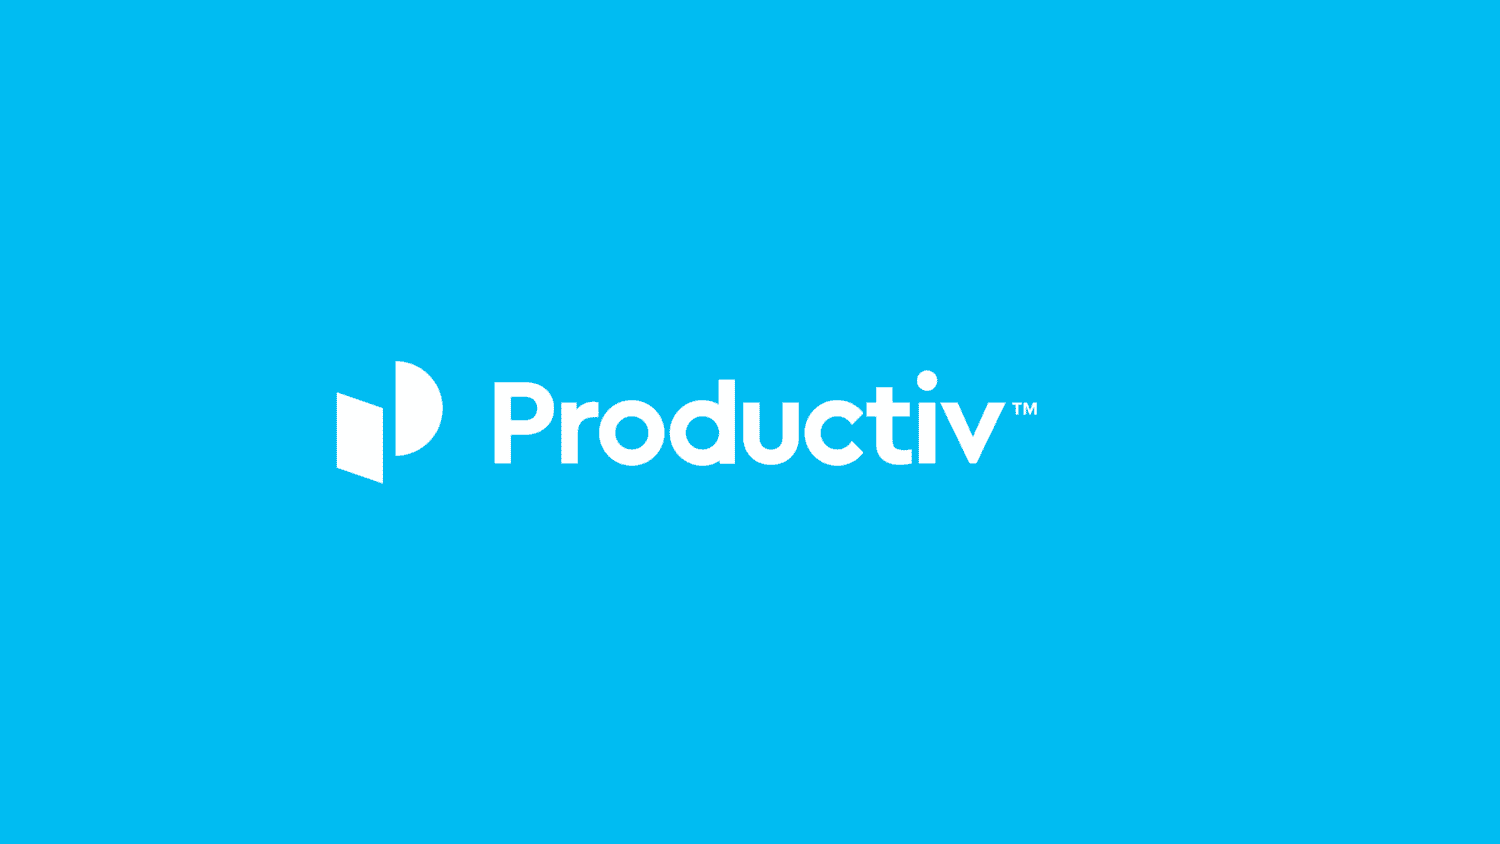 Productiv Insights Help Businesses Unlock Maximum Value From SaaS Applications